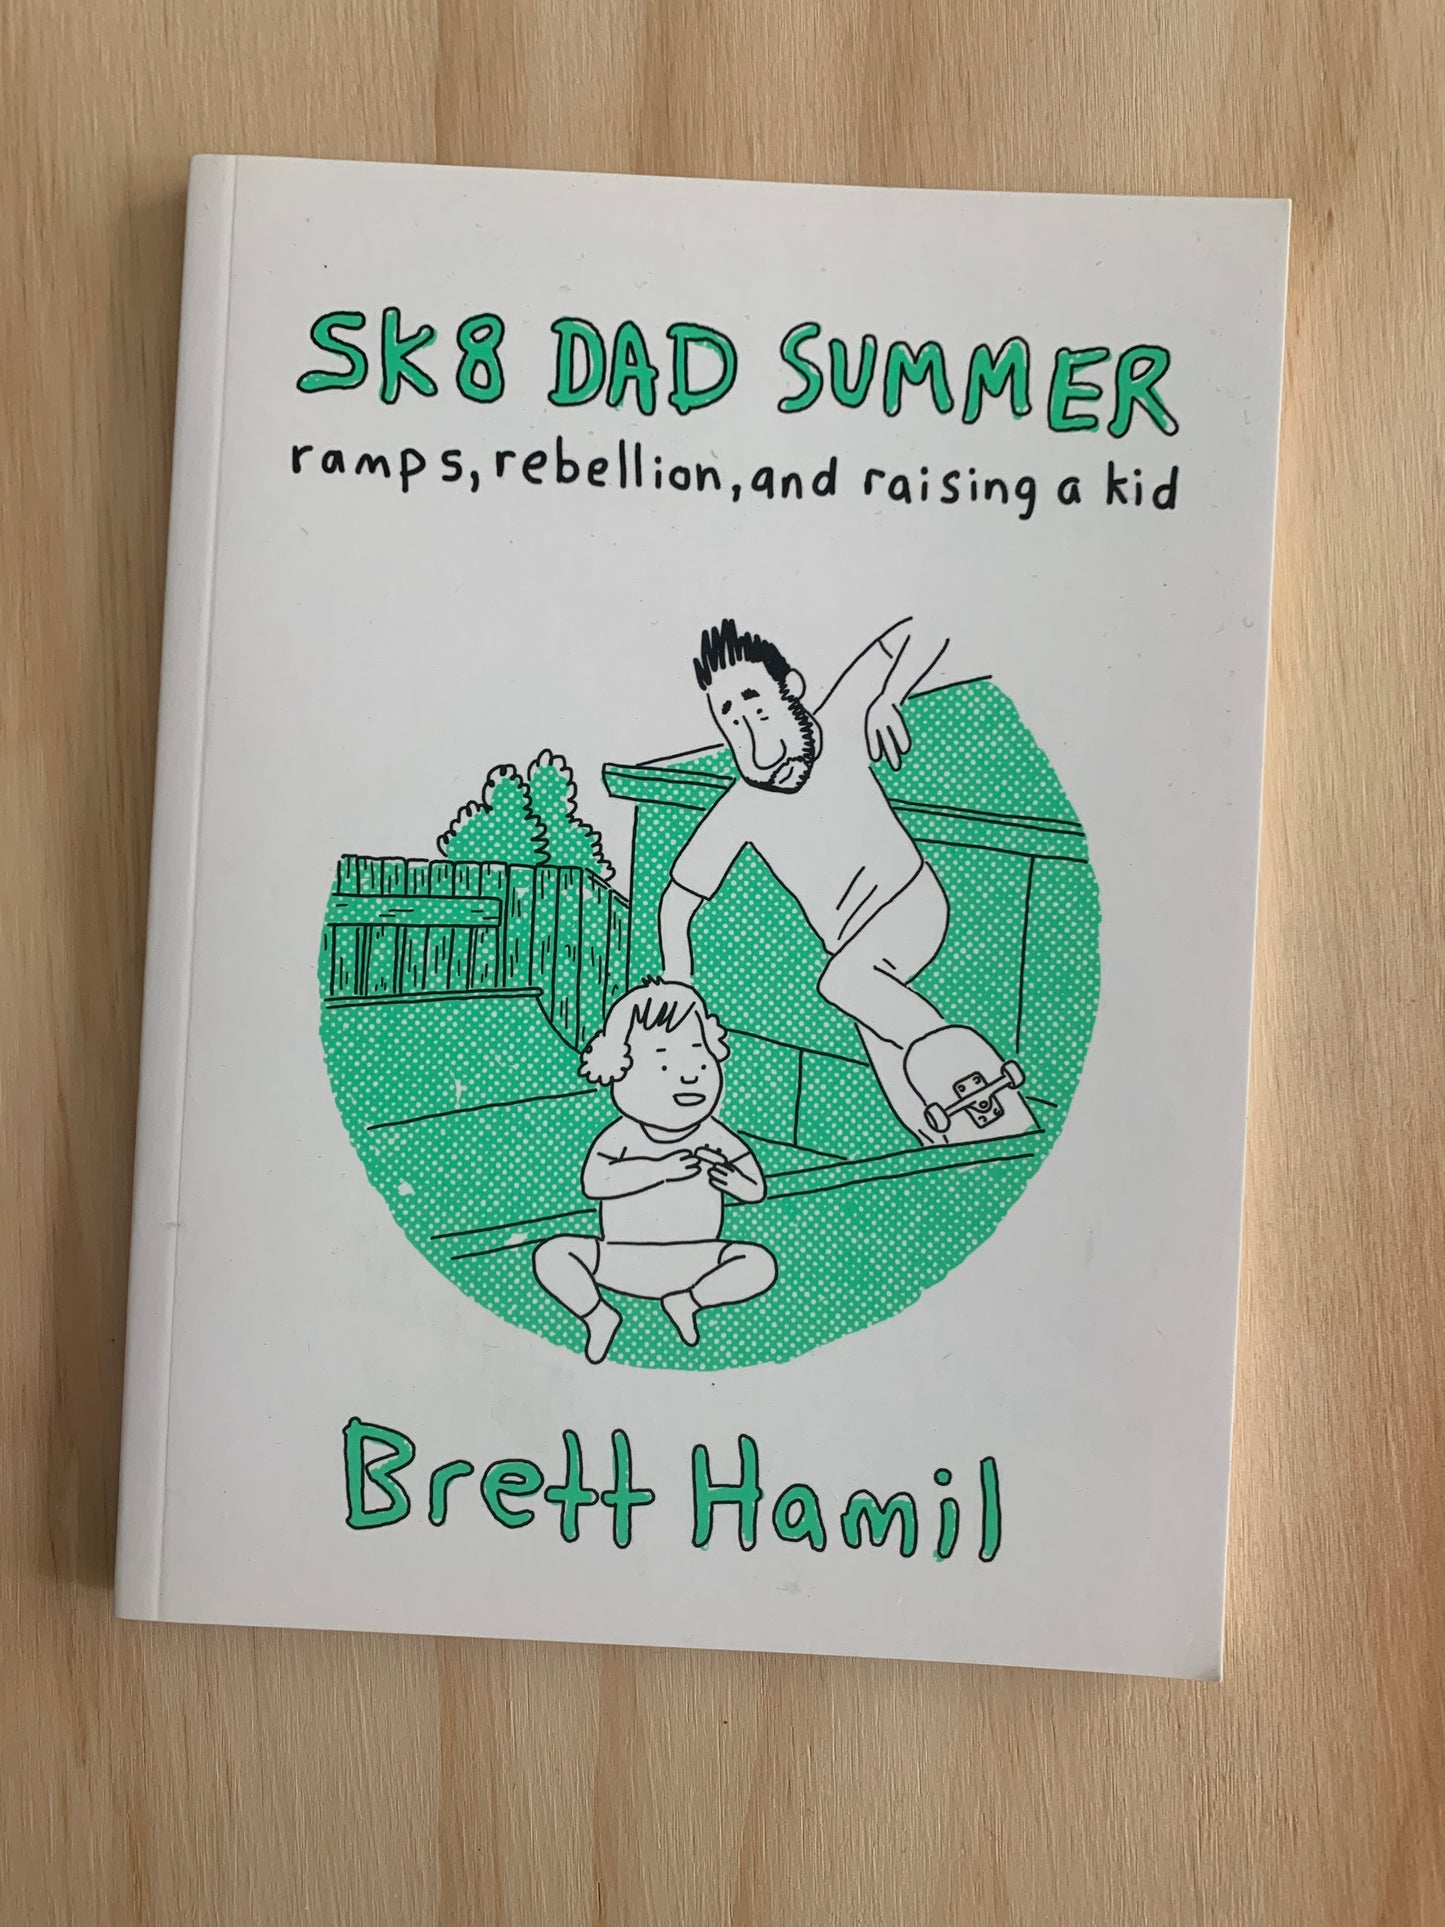 SK8 DAD SUMMER: Ramps, Rebellion, and Raising a Kid